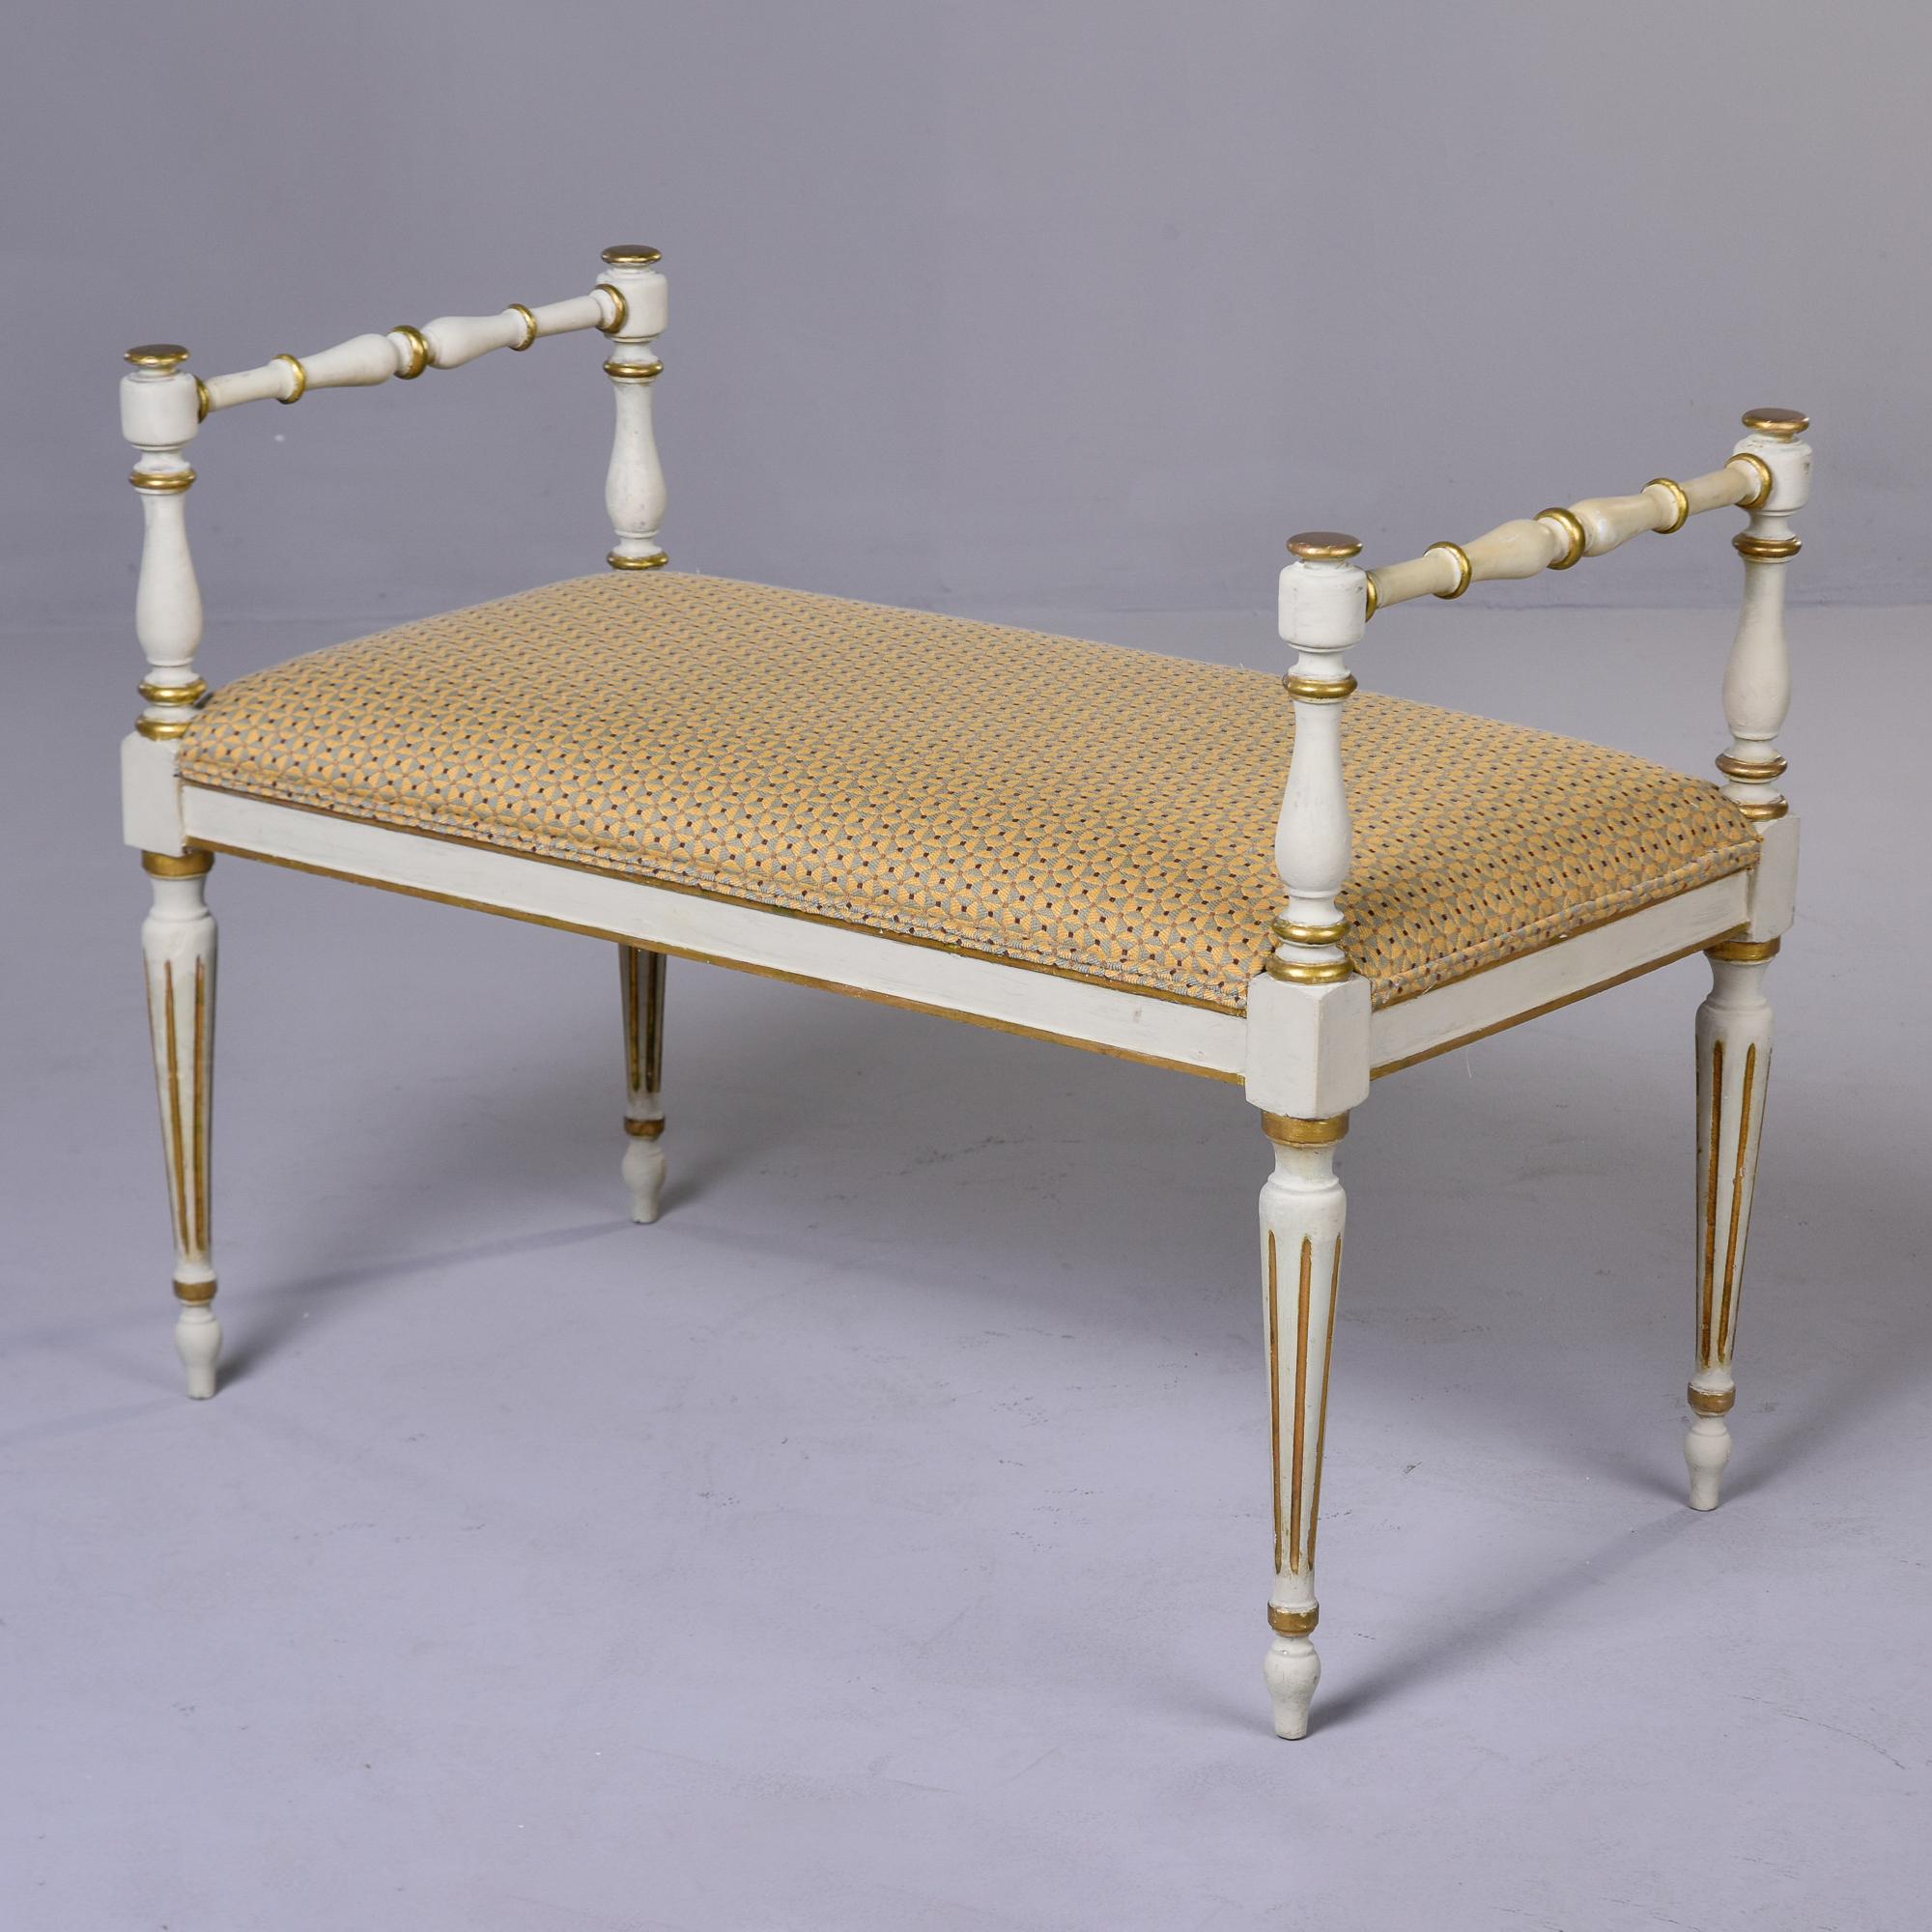 Found in France, this circa 1920s upholstered bench has an antique white painted frame with gilded detailing. Frame has arms with turned details, gilded accents and traditional tapered and reeded French legs. New upholstery in gold and blue gray